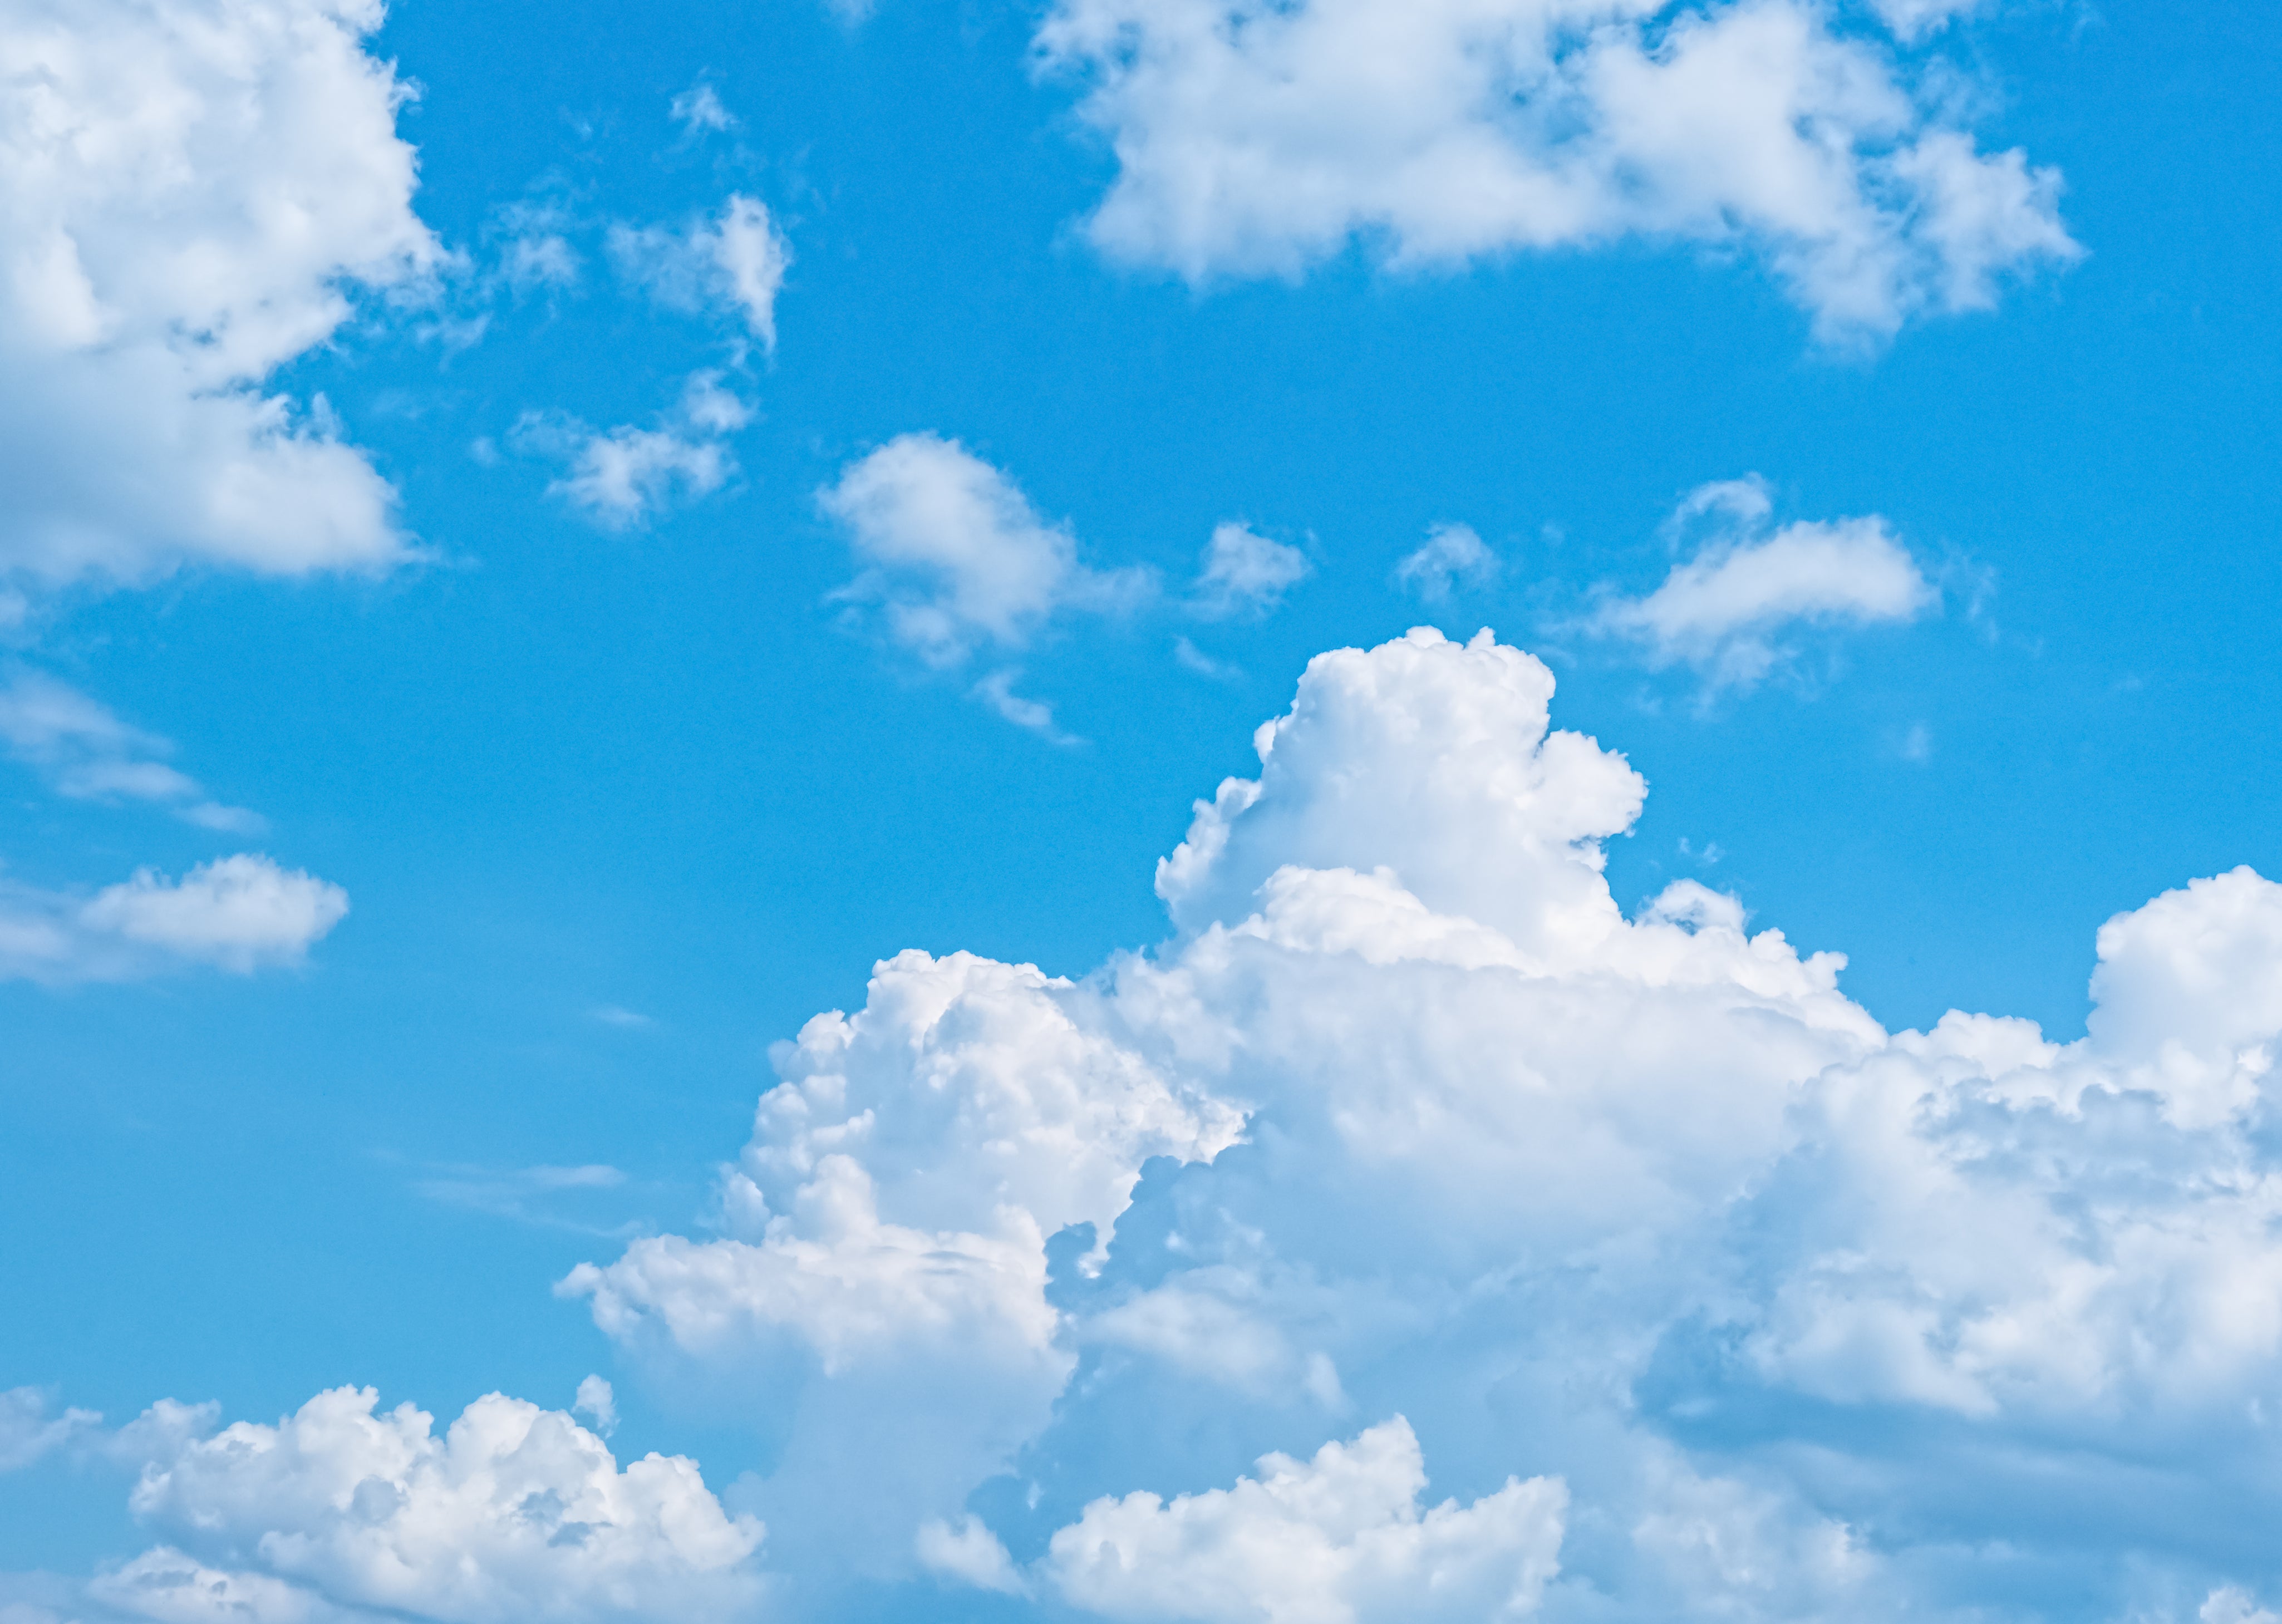 blue-sky-with-white-clouds-nature-background.jpg